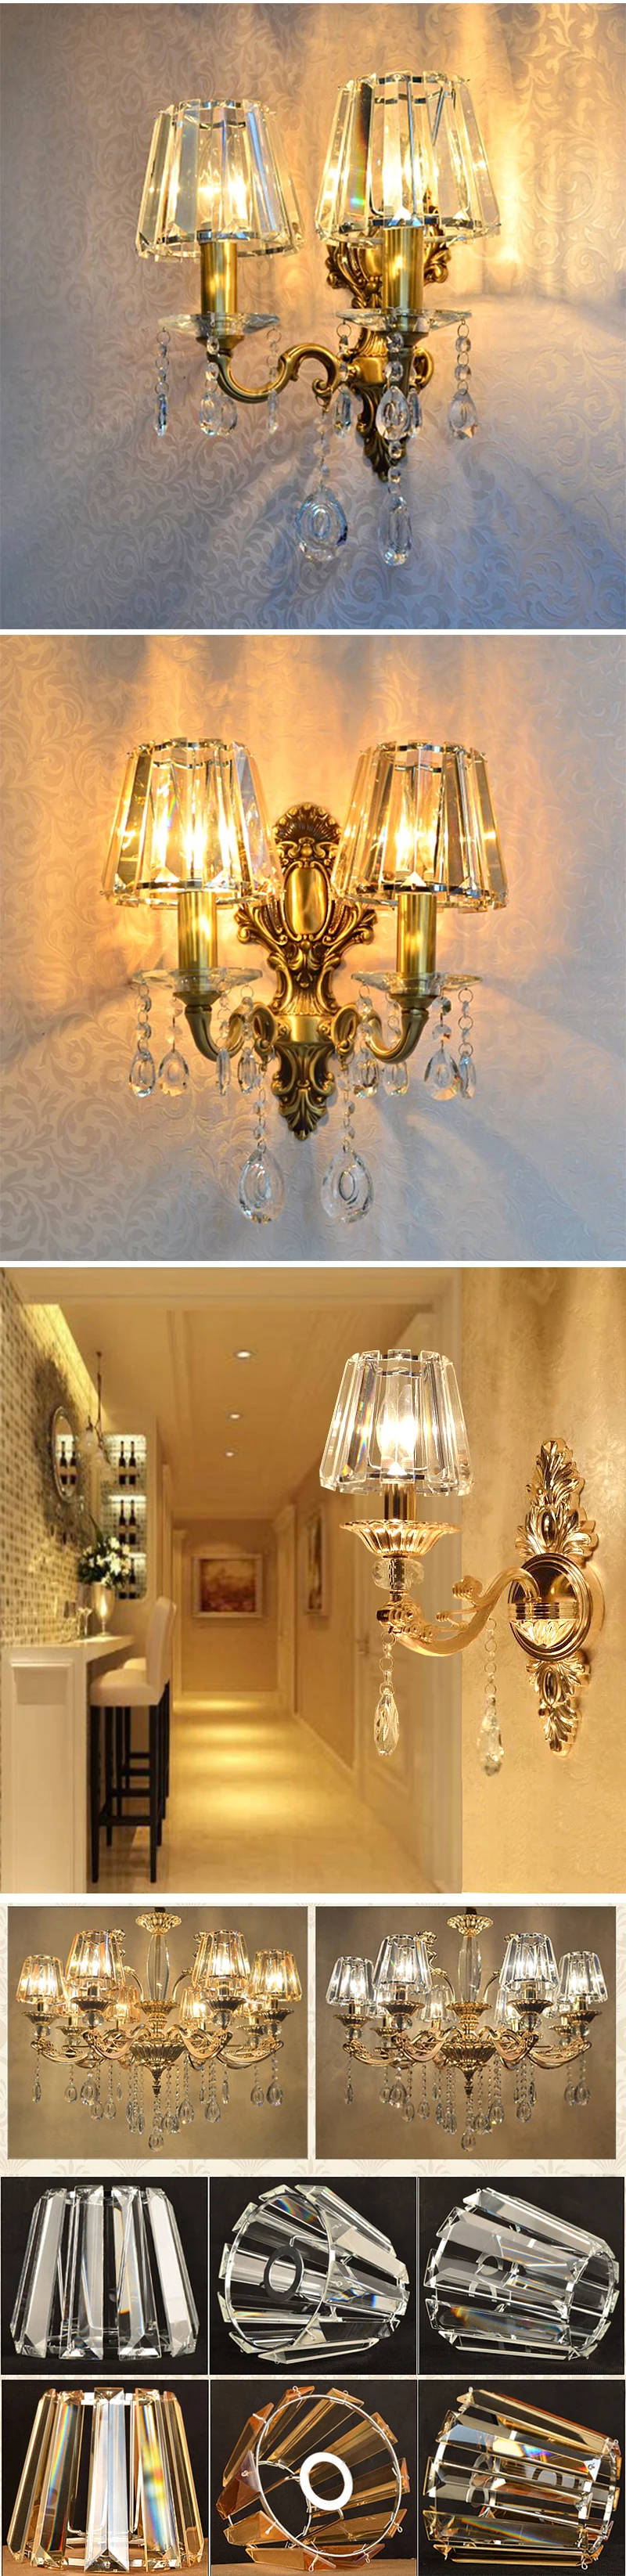 home hotel bedside luxury colored champagne amber cognac 2 lights Crystal Wall Sconce lights chandelier lamp